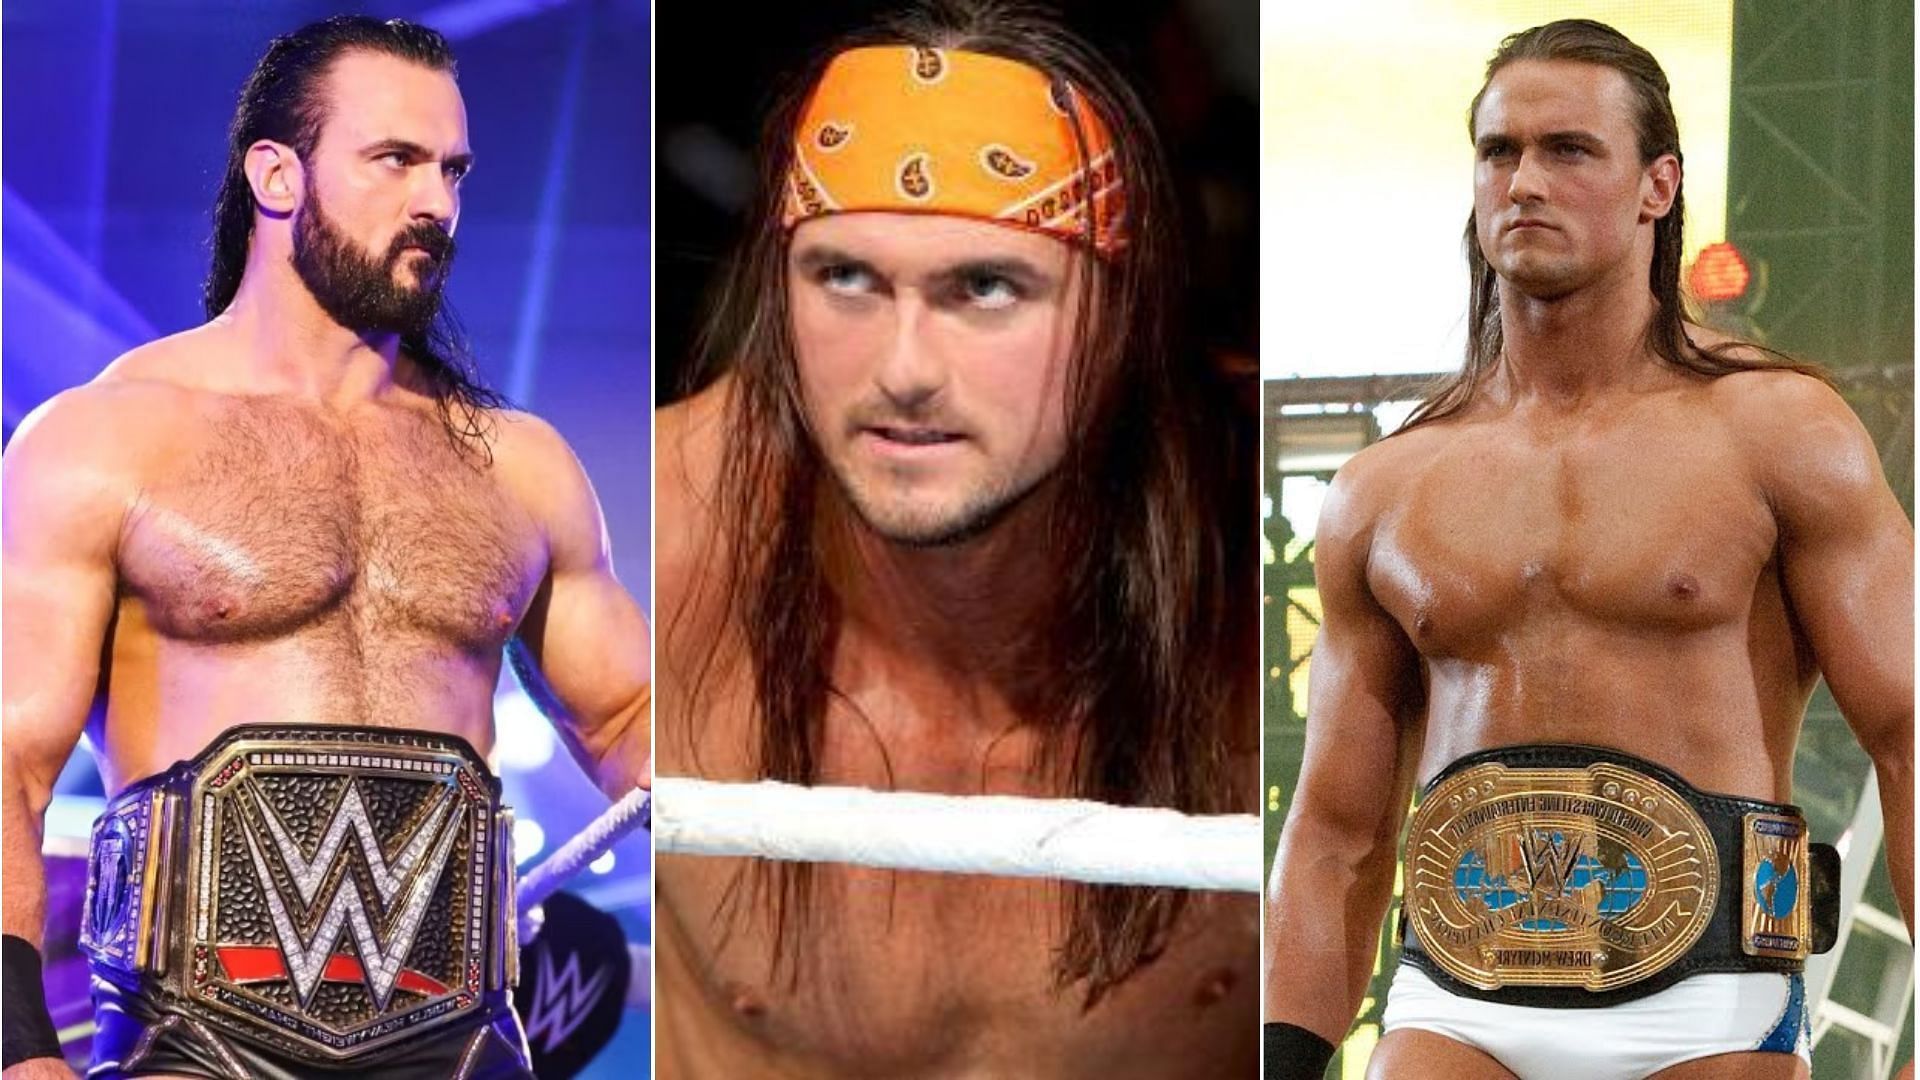 The Scottish Warrior is a two-time WWE Champion.